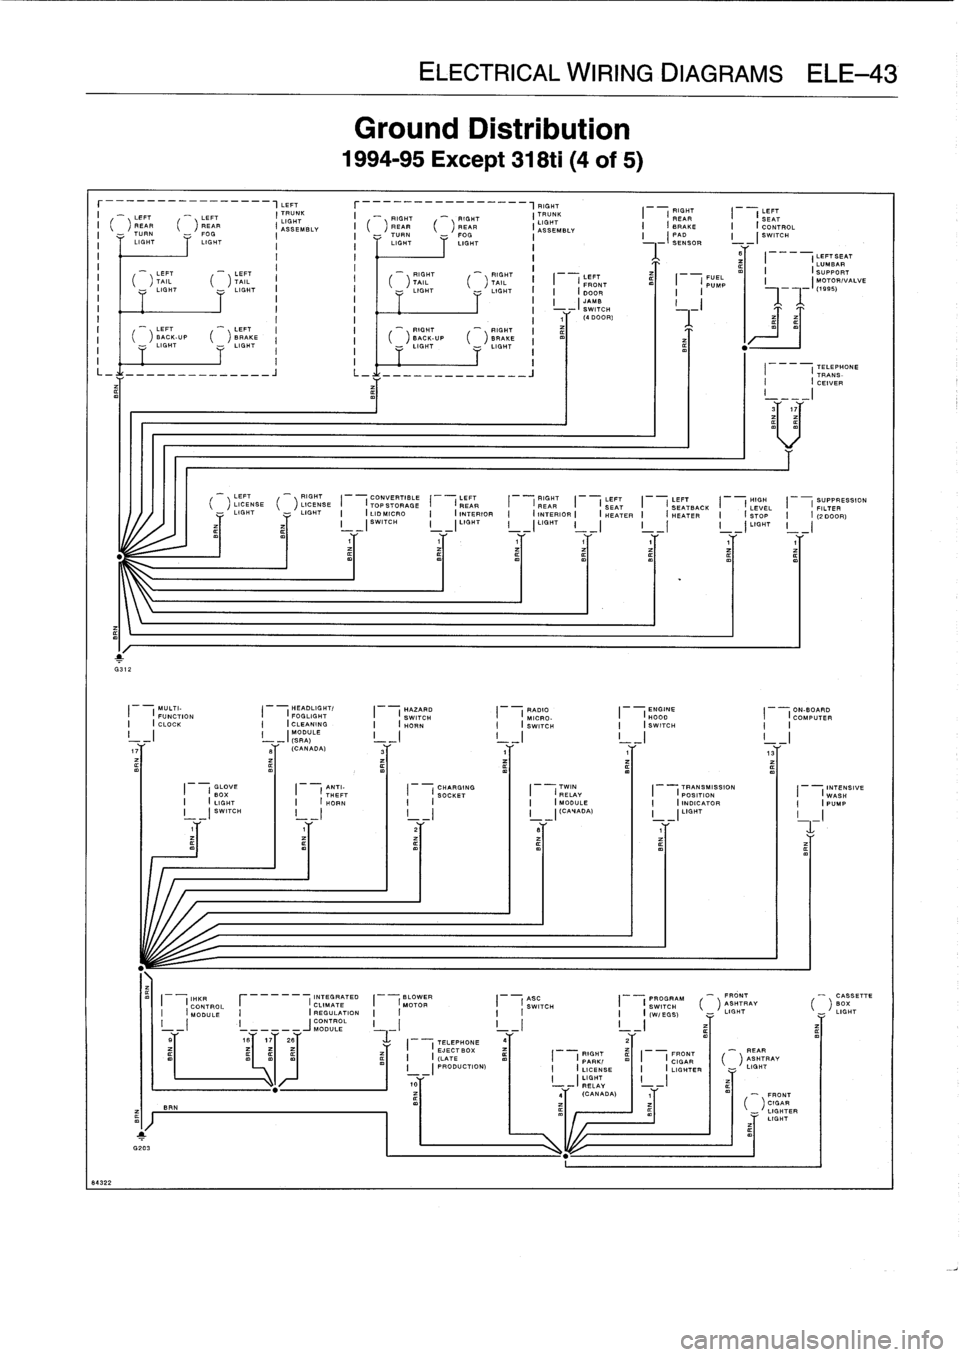 BMW 328i 1994 E36 Owners Guide 
ELECTRICAL
WIRING
DIAGRAMSELE-43

r----------_-__--,LEFT

	

r---__-------~_--,FIGHT
I

	

-

	

RIGHT

	

LIT
LEFT

	

"-

	

LEFT

	

I
IGHT
K

	

I

	

_

	

RIGHT

	



	

RIGHT

	

I
TRUNK
SEM